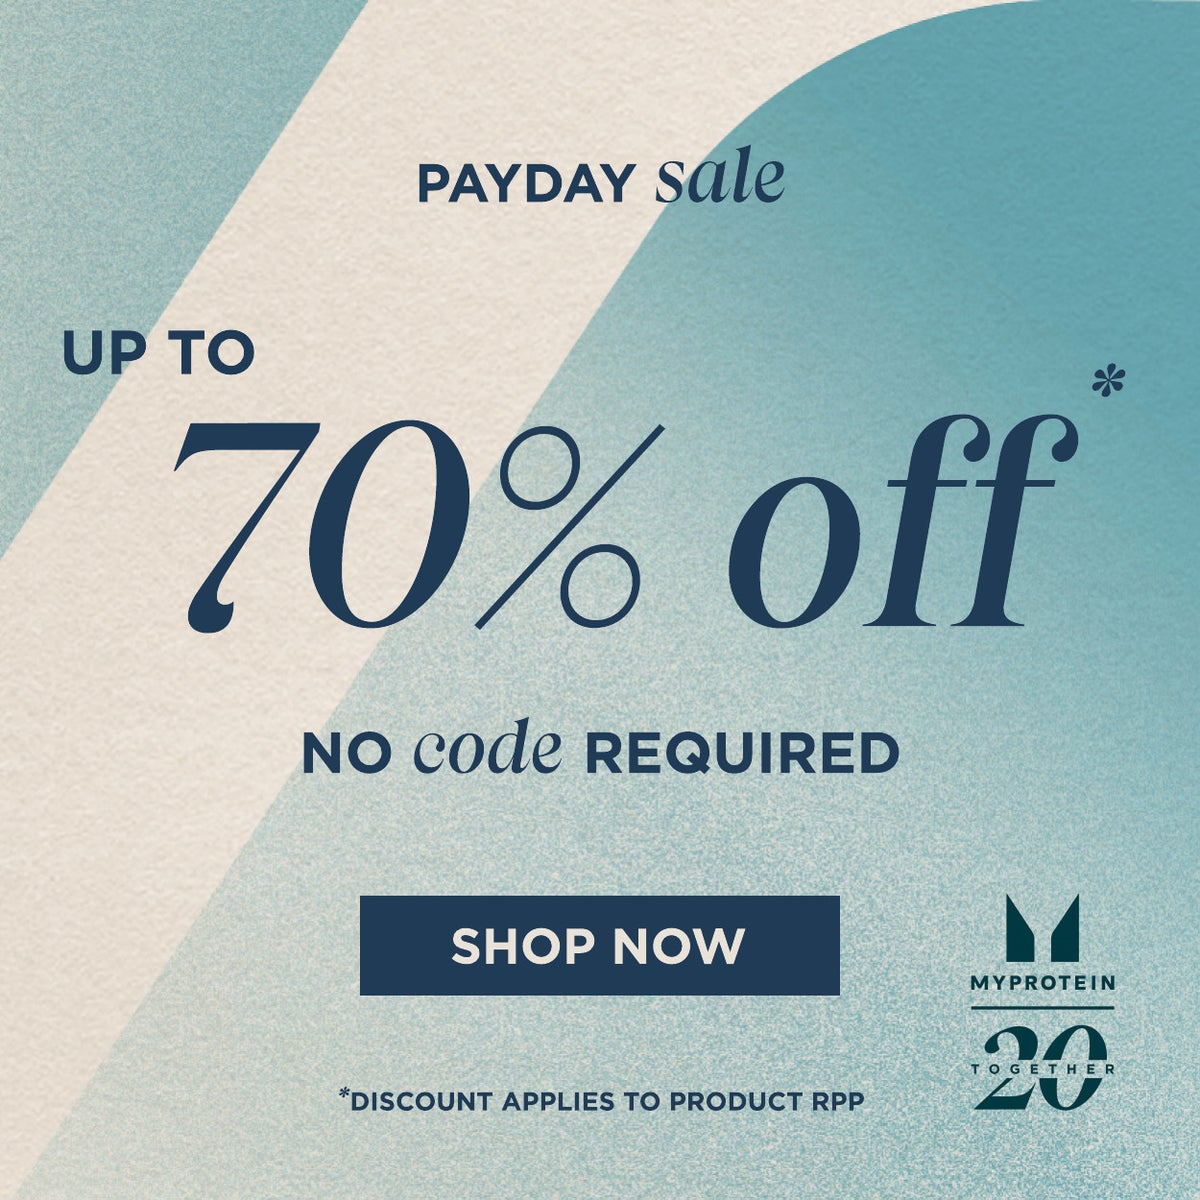 Payday sale. Up to 70% off * Discount applies to product rrp at basket. shop now.